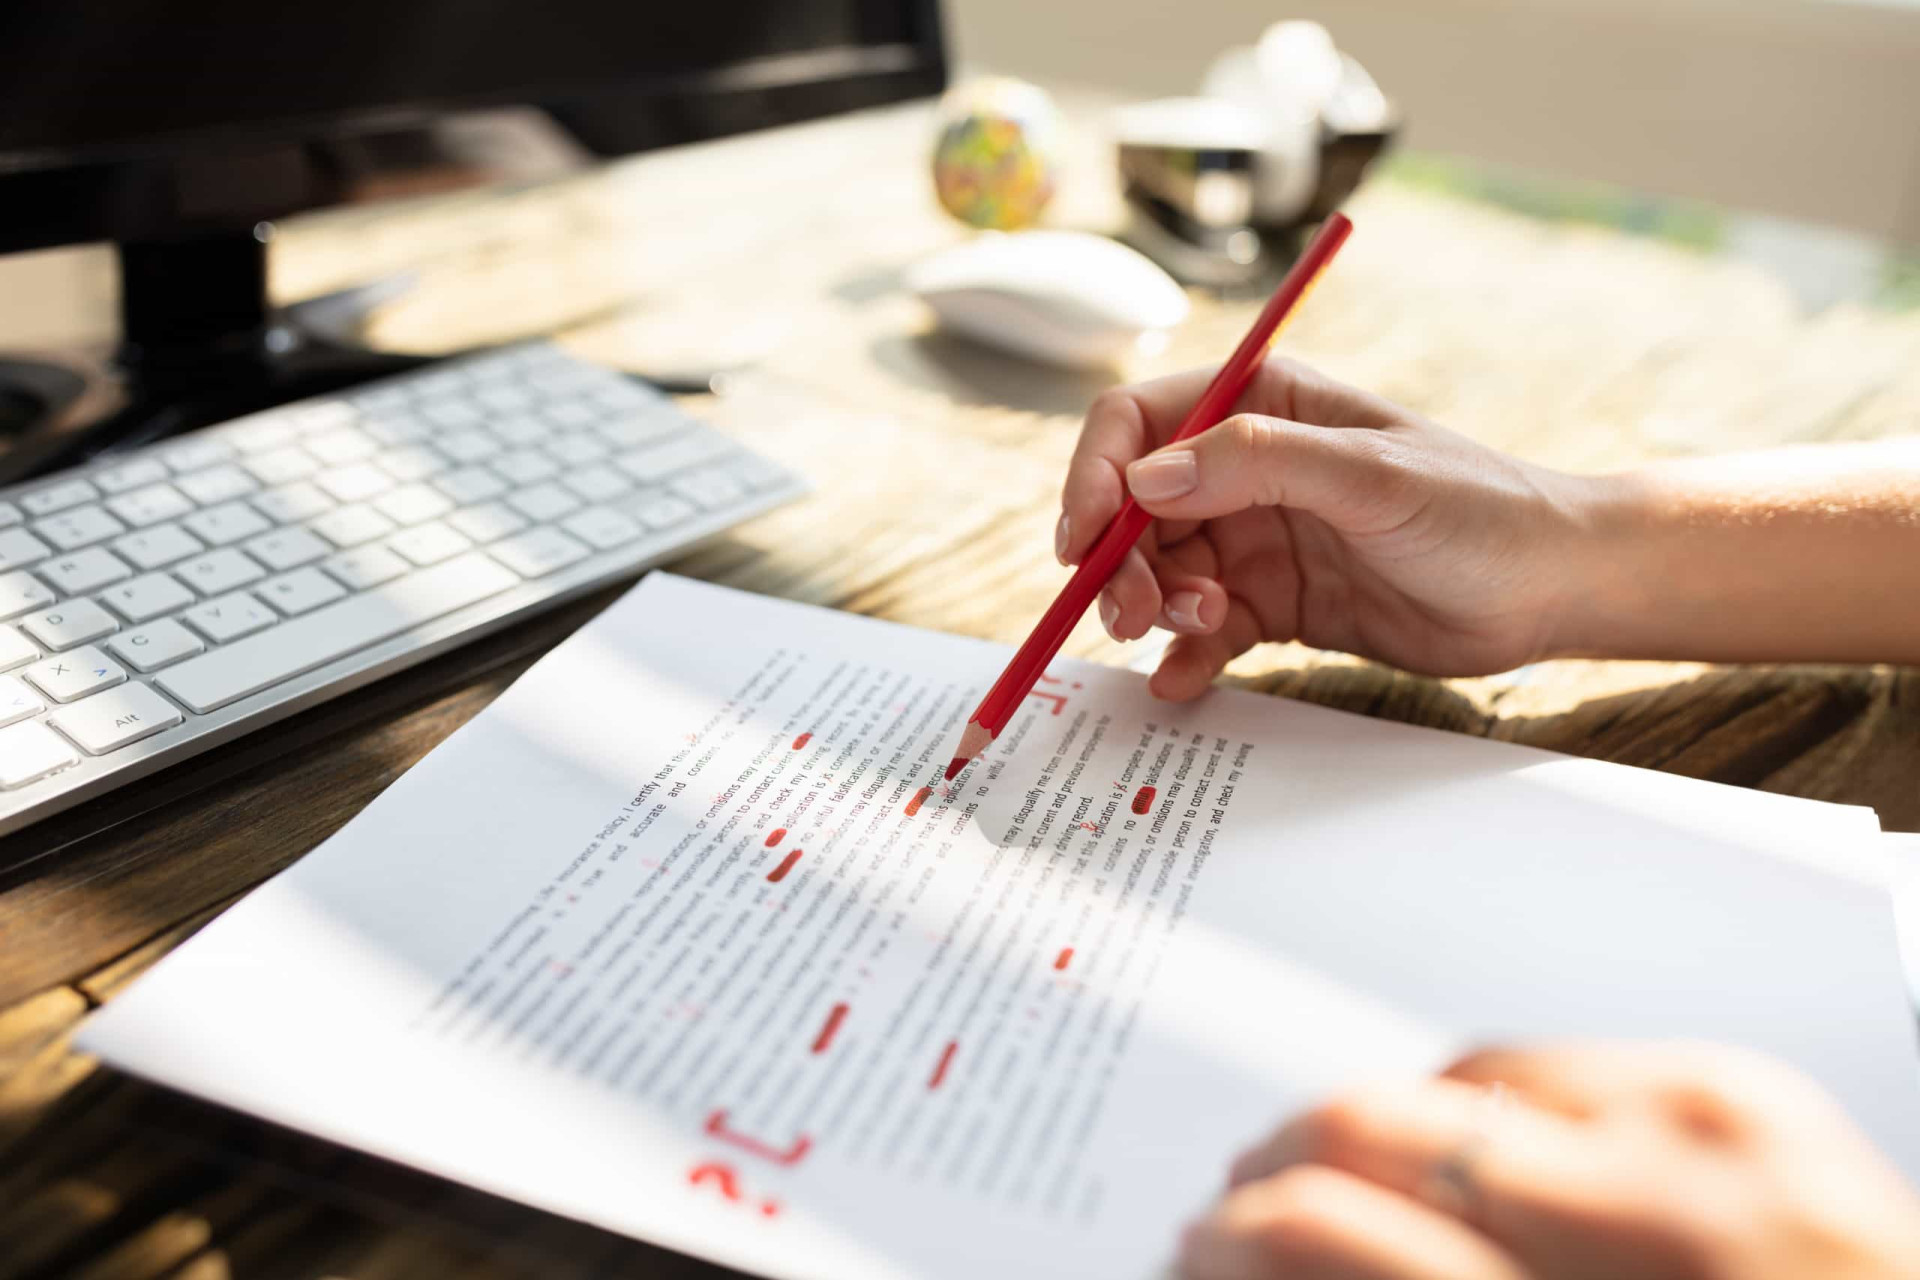 <p>If you’re making grammatical mistakes in your CV or cover letter to an employer, it just shows them that you’re not one for paying attention to details.</p><p>You may also like:<a href="https://www.starsinsider.com/n/326128?utm_source=msn.com&utm_medium=display&utm_campaign=referral_description&utm_content=471338v2en-en"> The Man in Black: How well do you know Johnny Cash?</a></p>